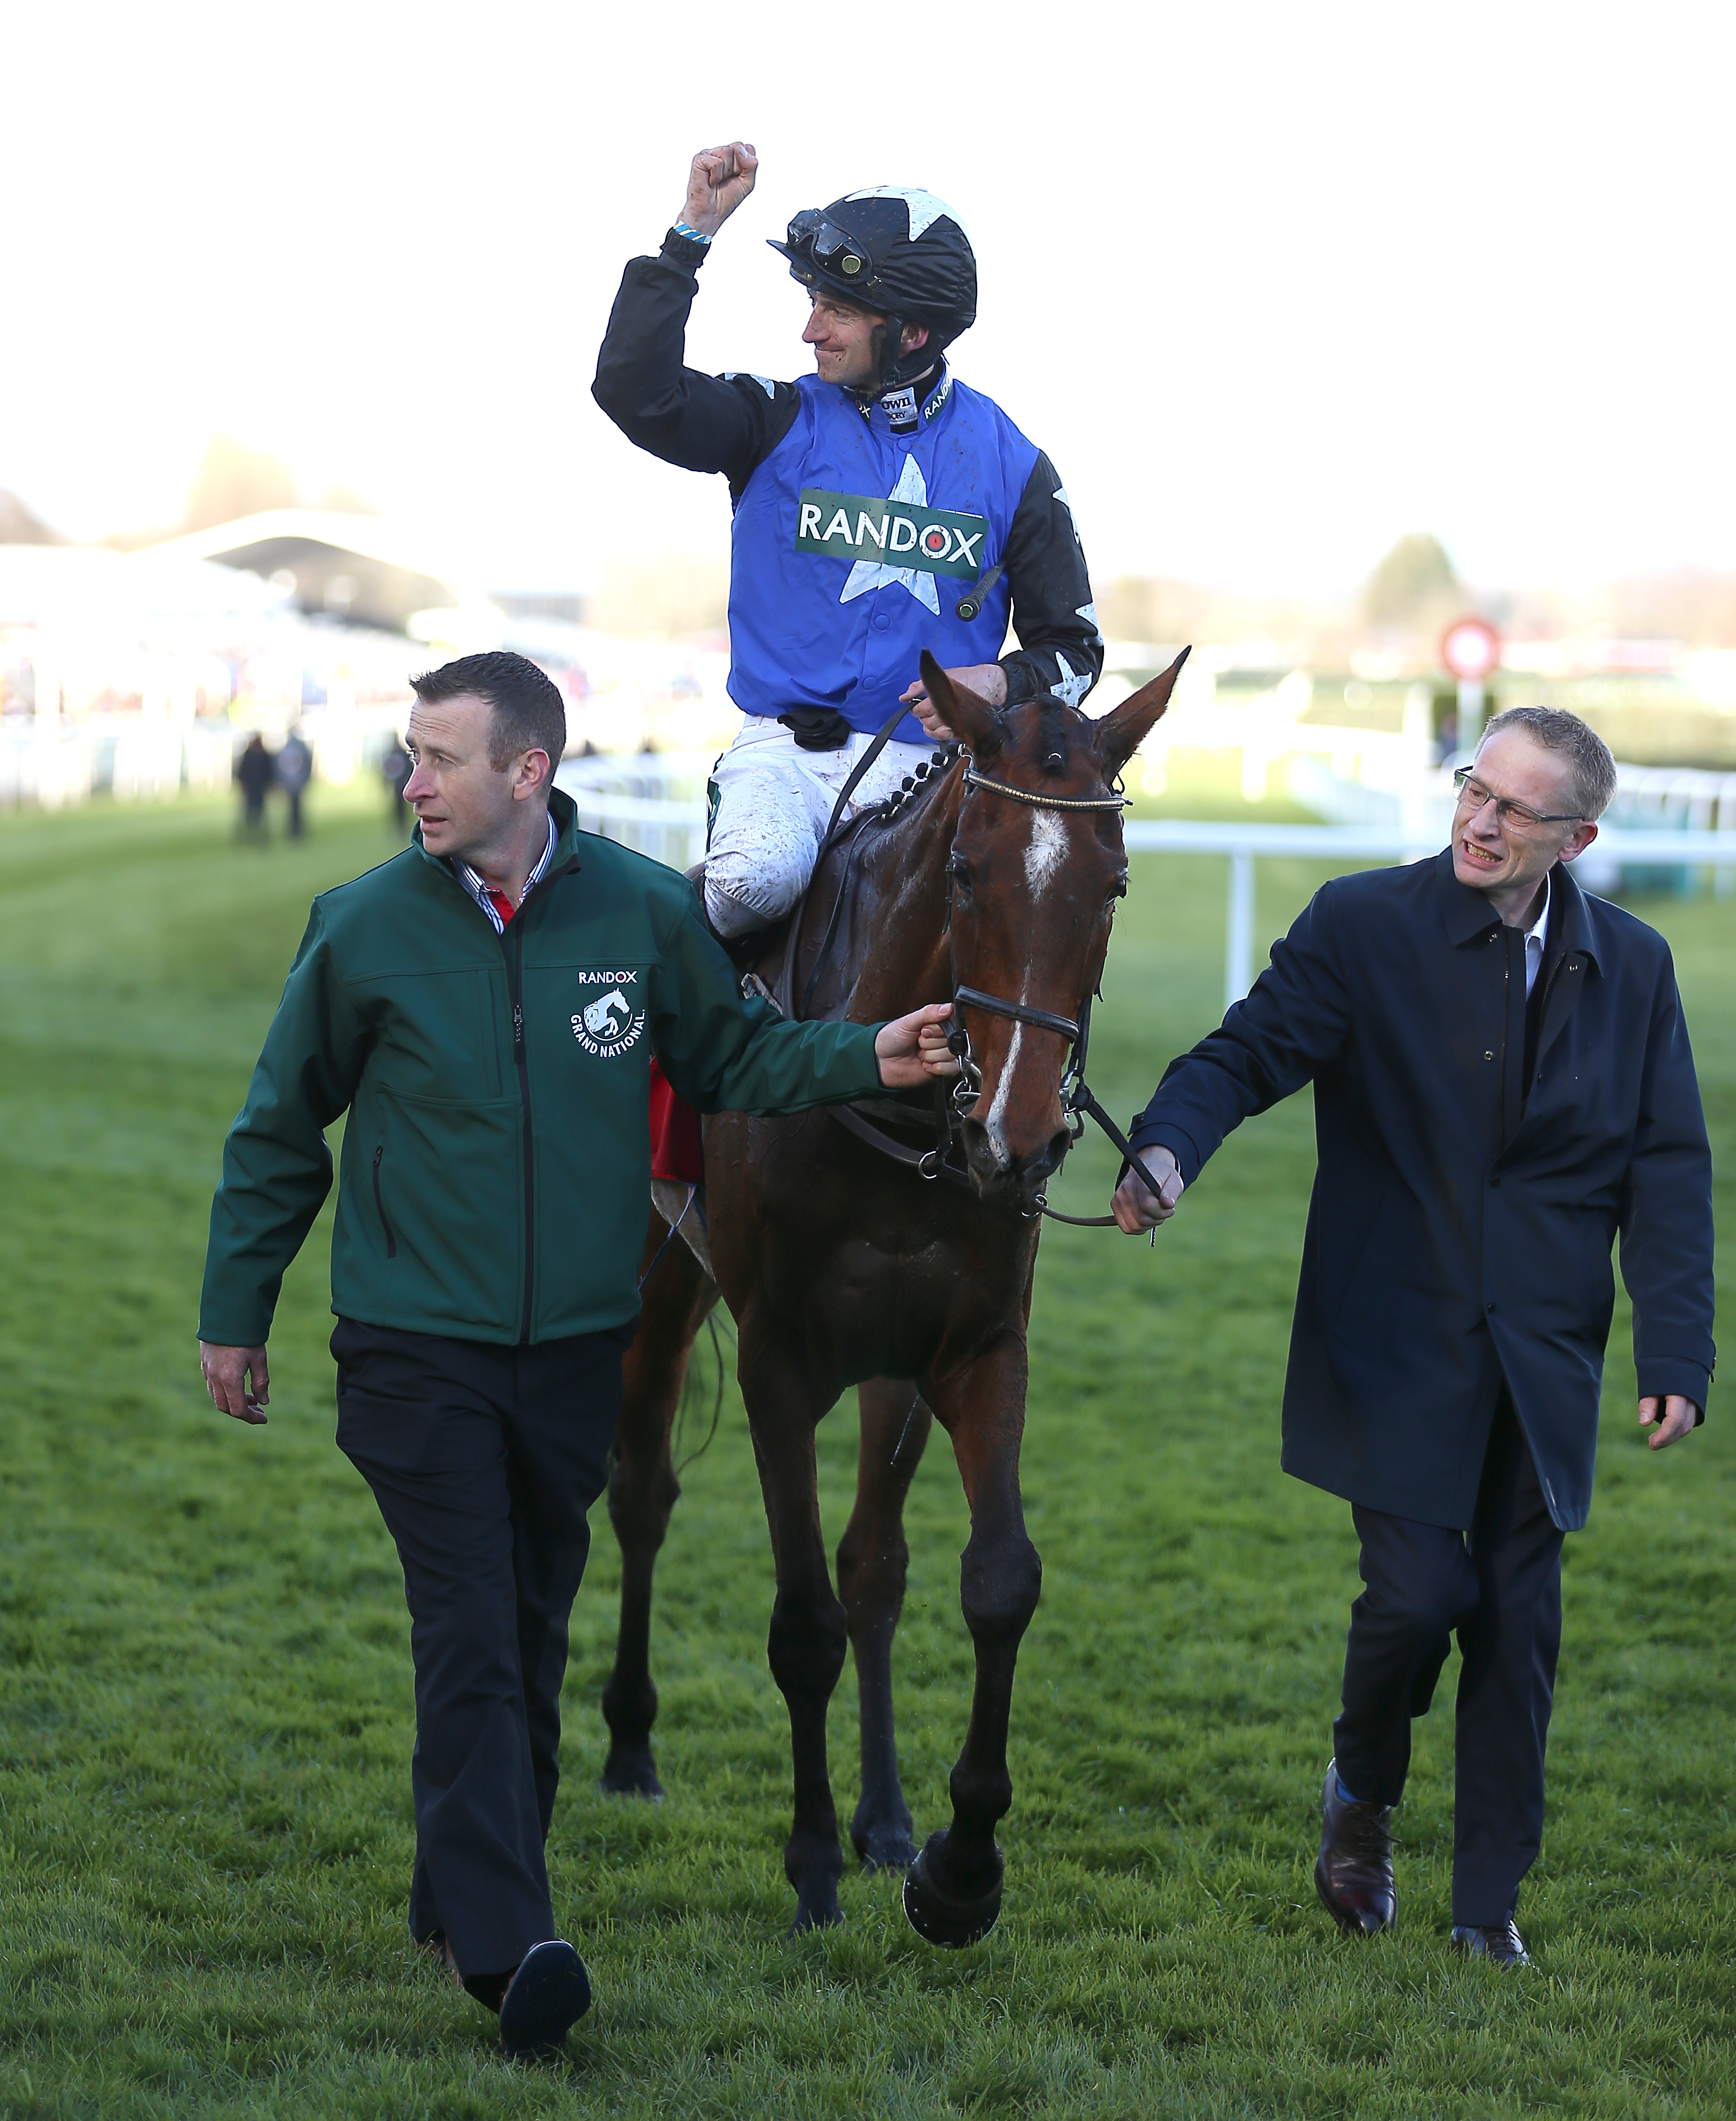 Ashroe Diamond ridden by Patrick Mullins celebrates winning the Goffs UK Nickel Coin Mares’ Standard Open National Hunt at Aintree Racecourse